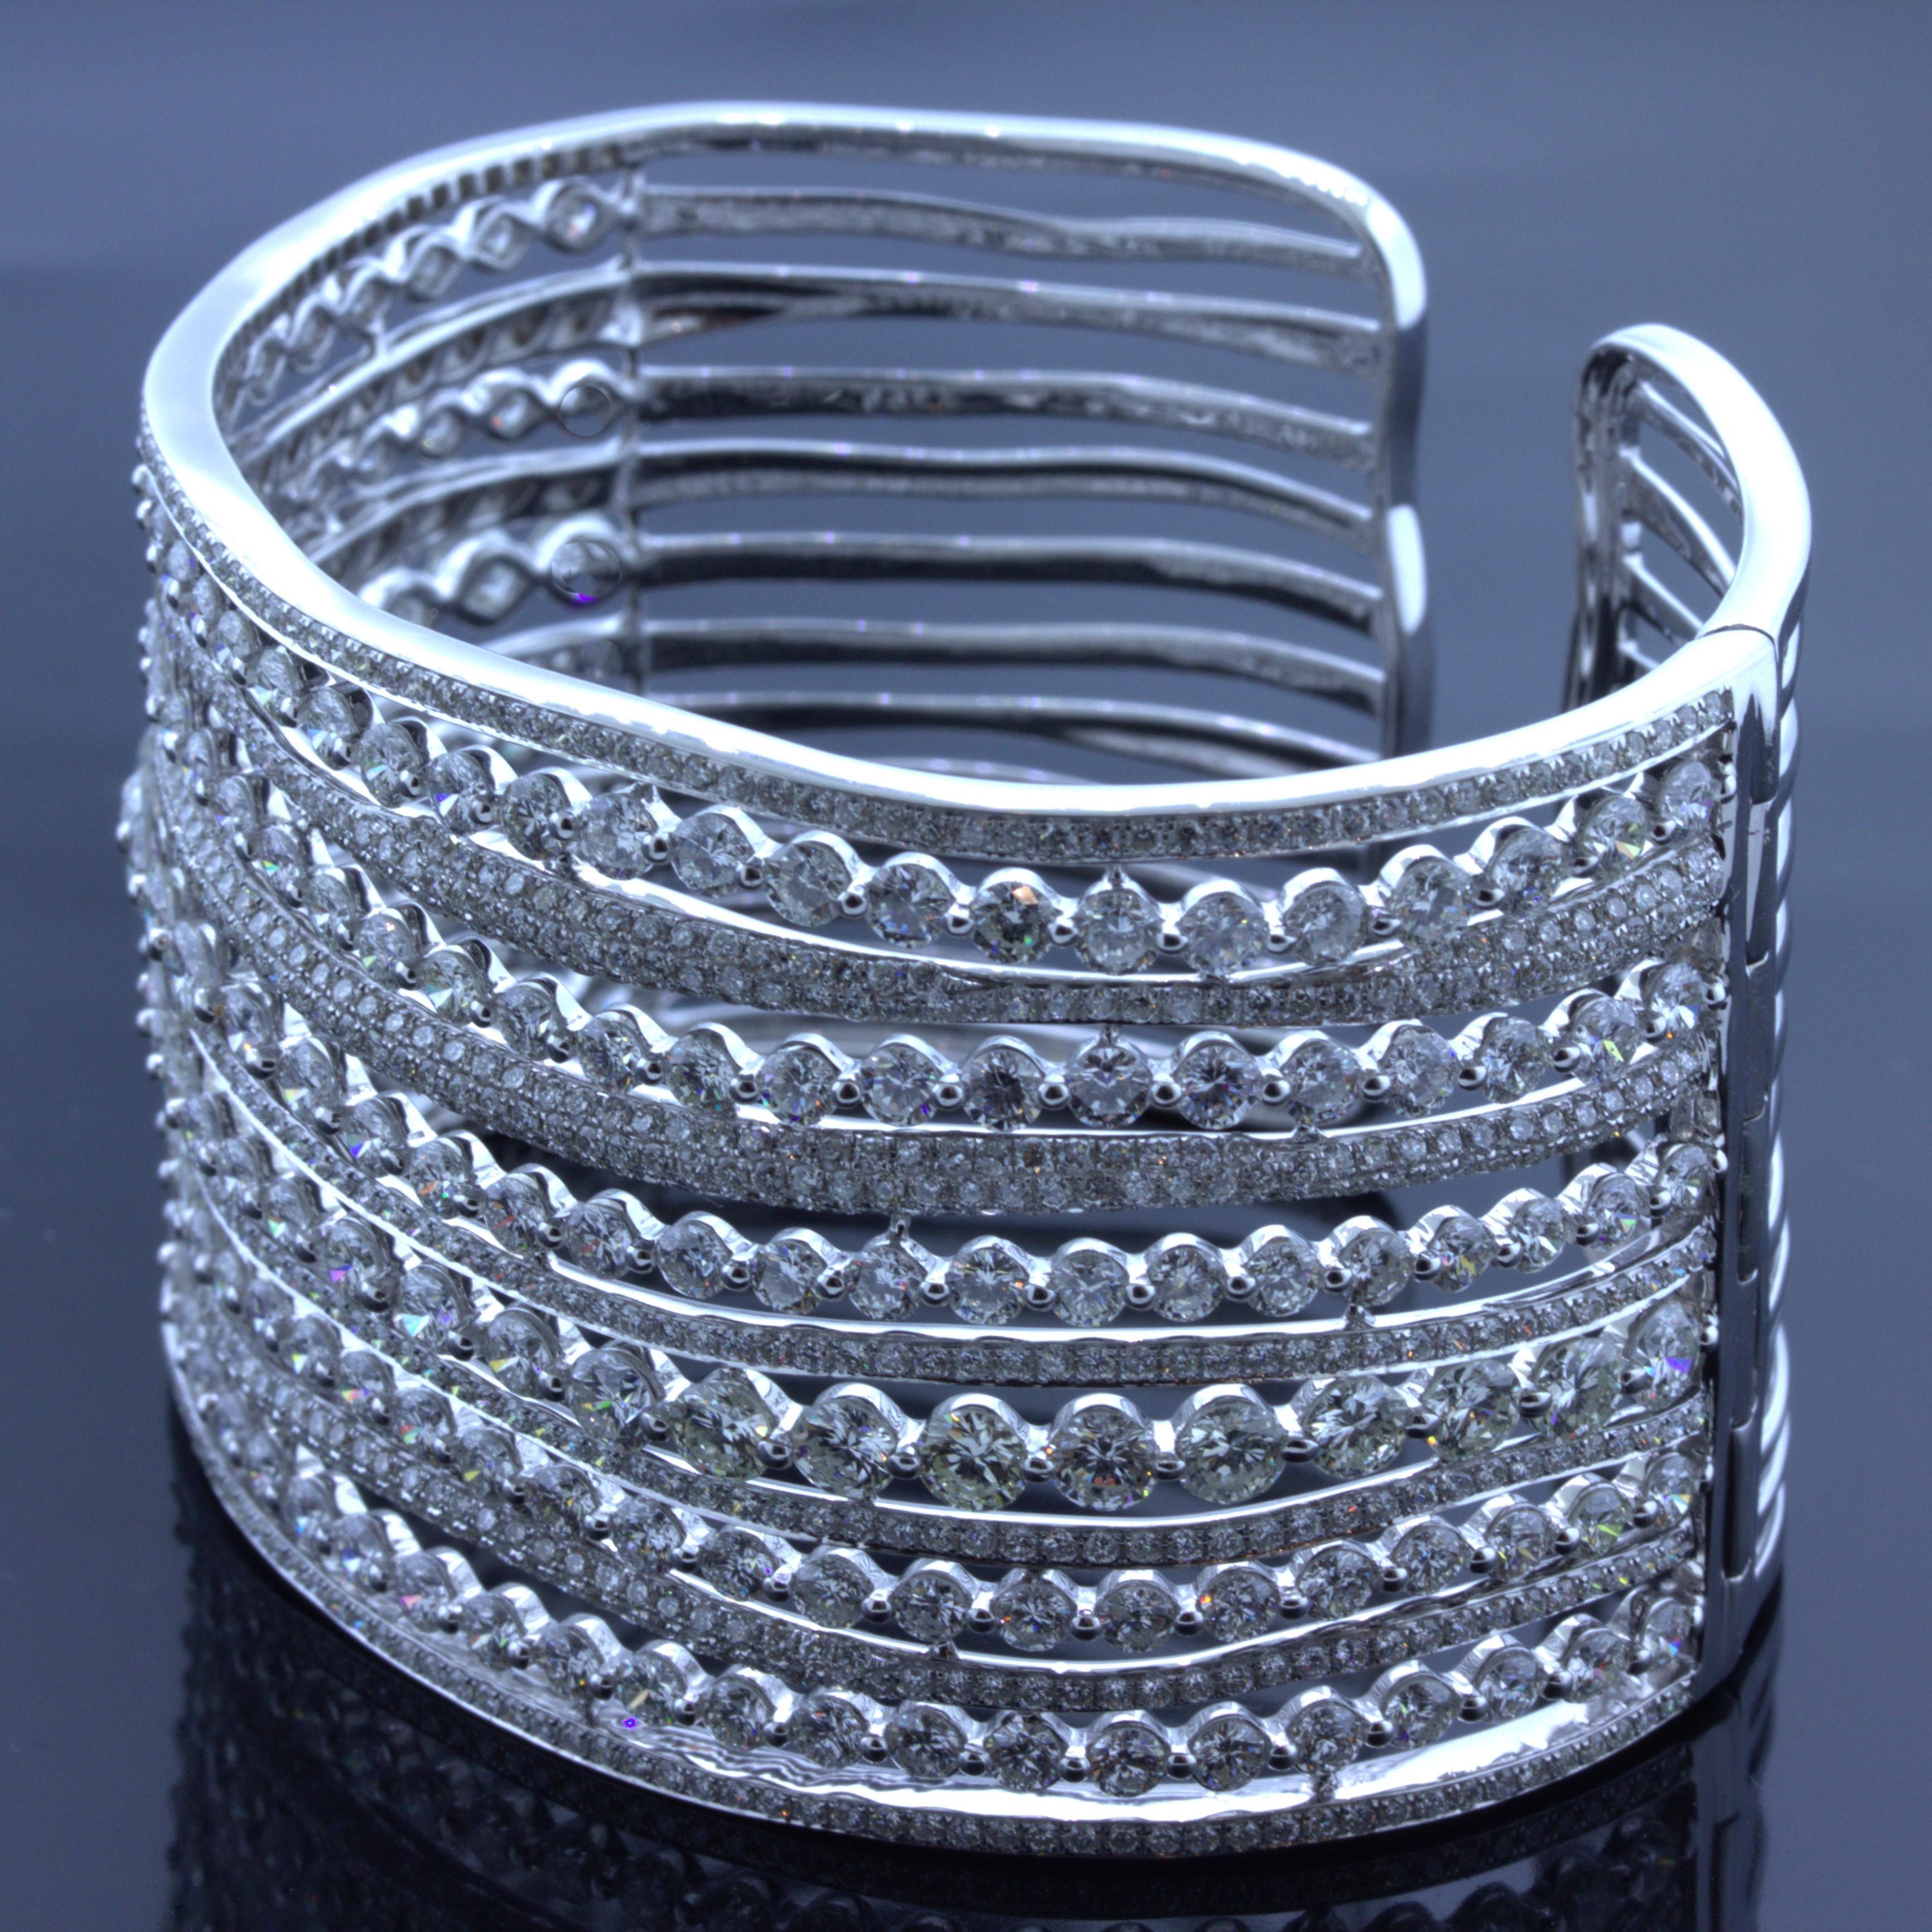 A sleek and sexy cuff bracelet featuring 32.76 carats of round brilliant-cut diamonds set in rows of waves. The cuff features interchanging rows of diamonds, switching from larger sized single diamonds to smaller pave-set diamonds giving the piece